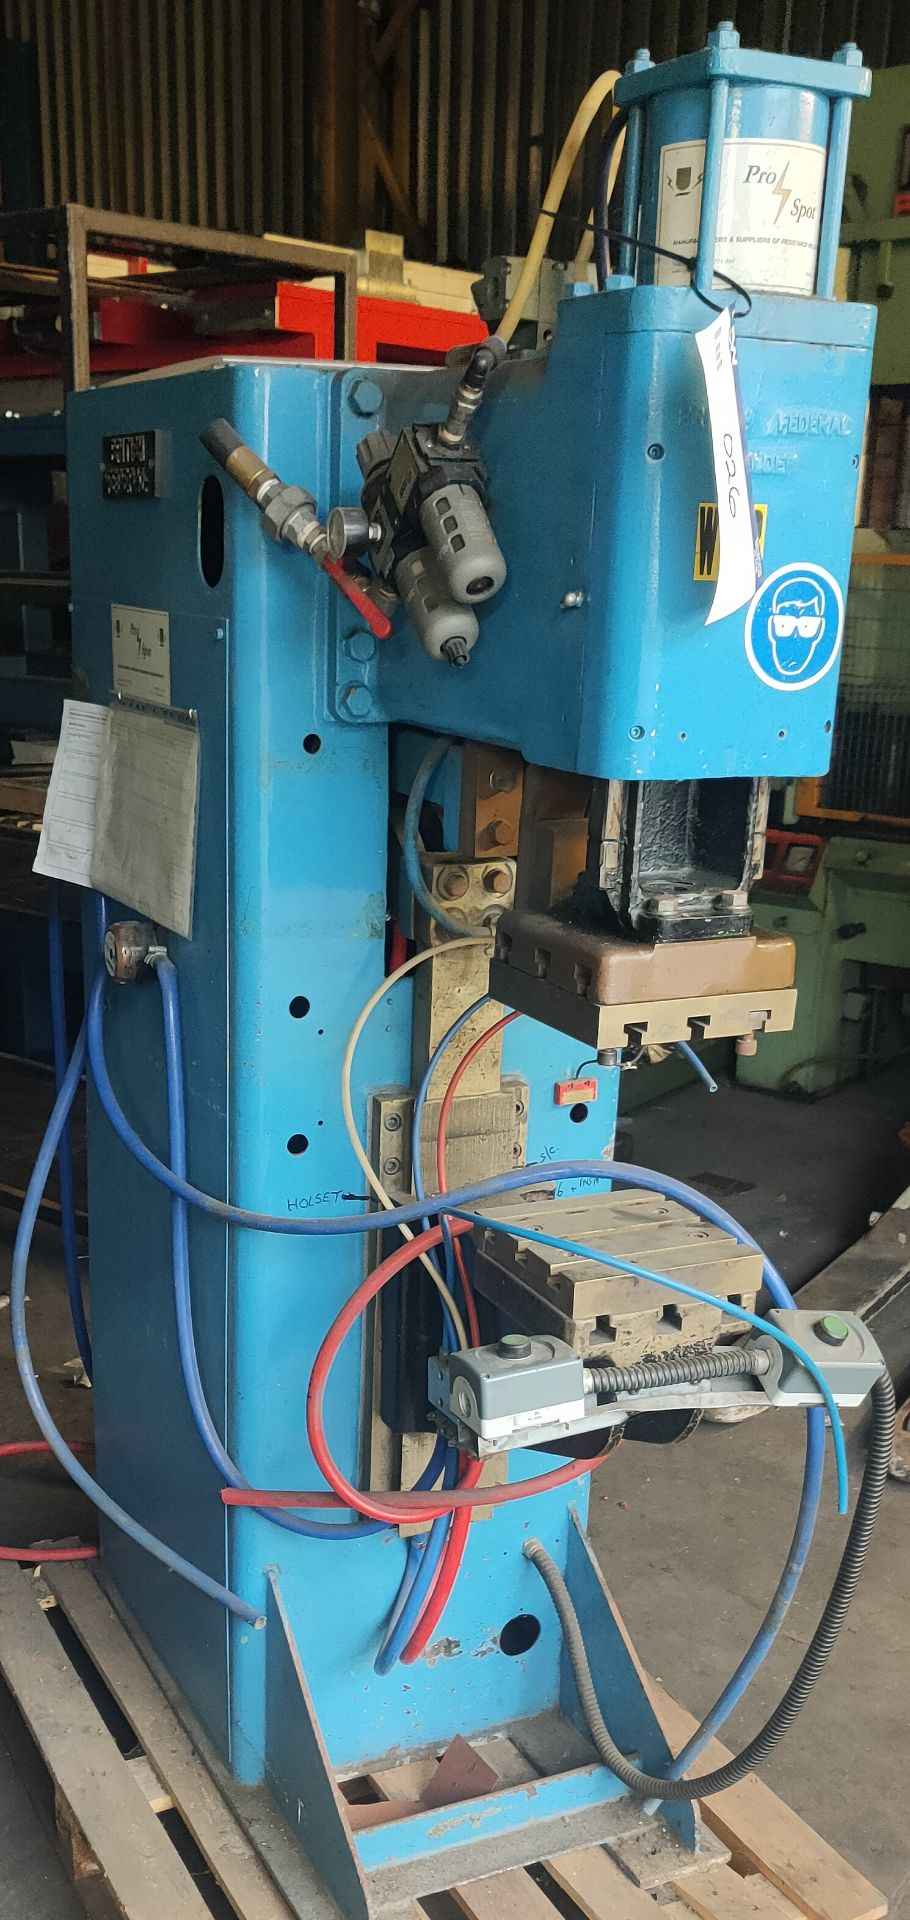 British Federal Spot Welder/ Pro Spot, approx. 150cm x 115cm x 80cm, loading free of charge - yes ( - Image 3 of 3